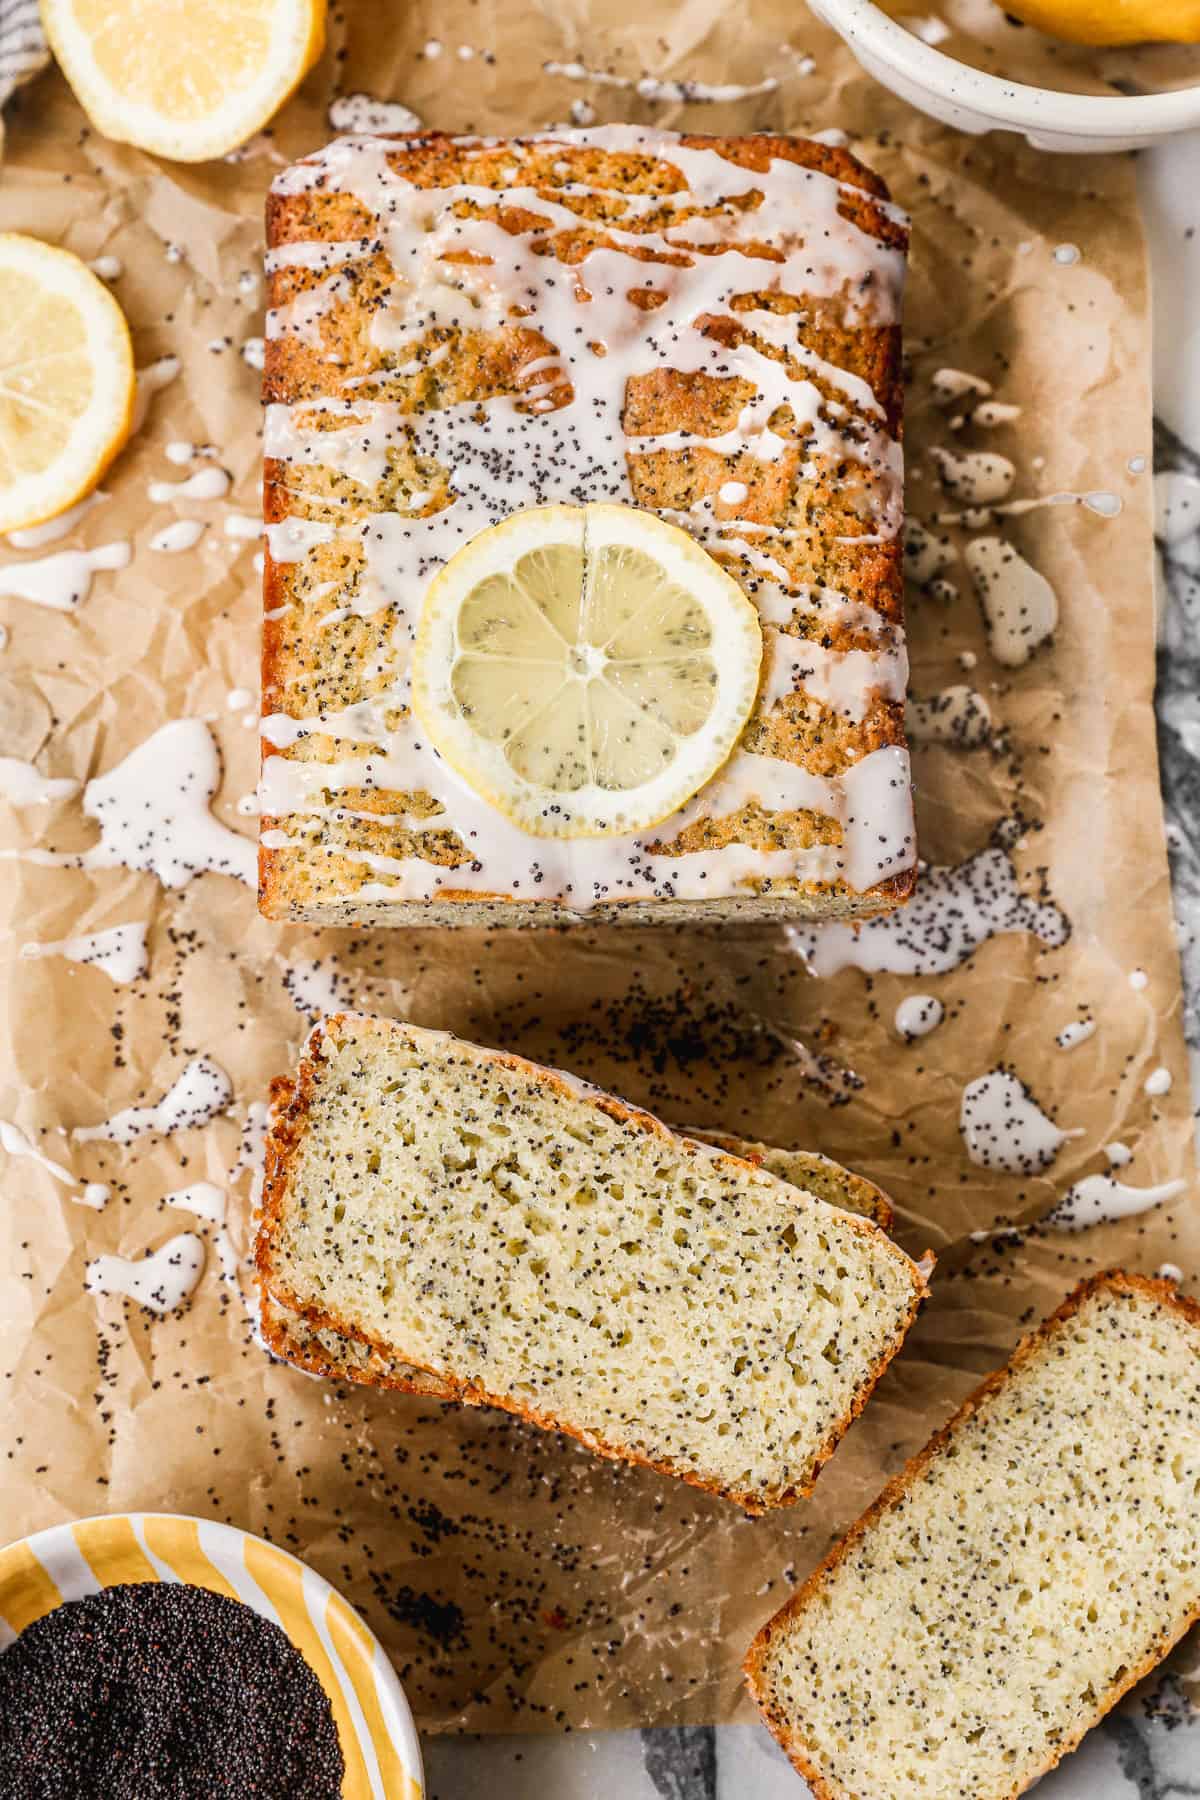 A loaf of homemade Lemon Poppy Seed Bread wiht lemon glaze and a slice of lemon on the top with a couple slices cut and ready to eat.